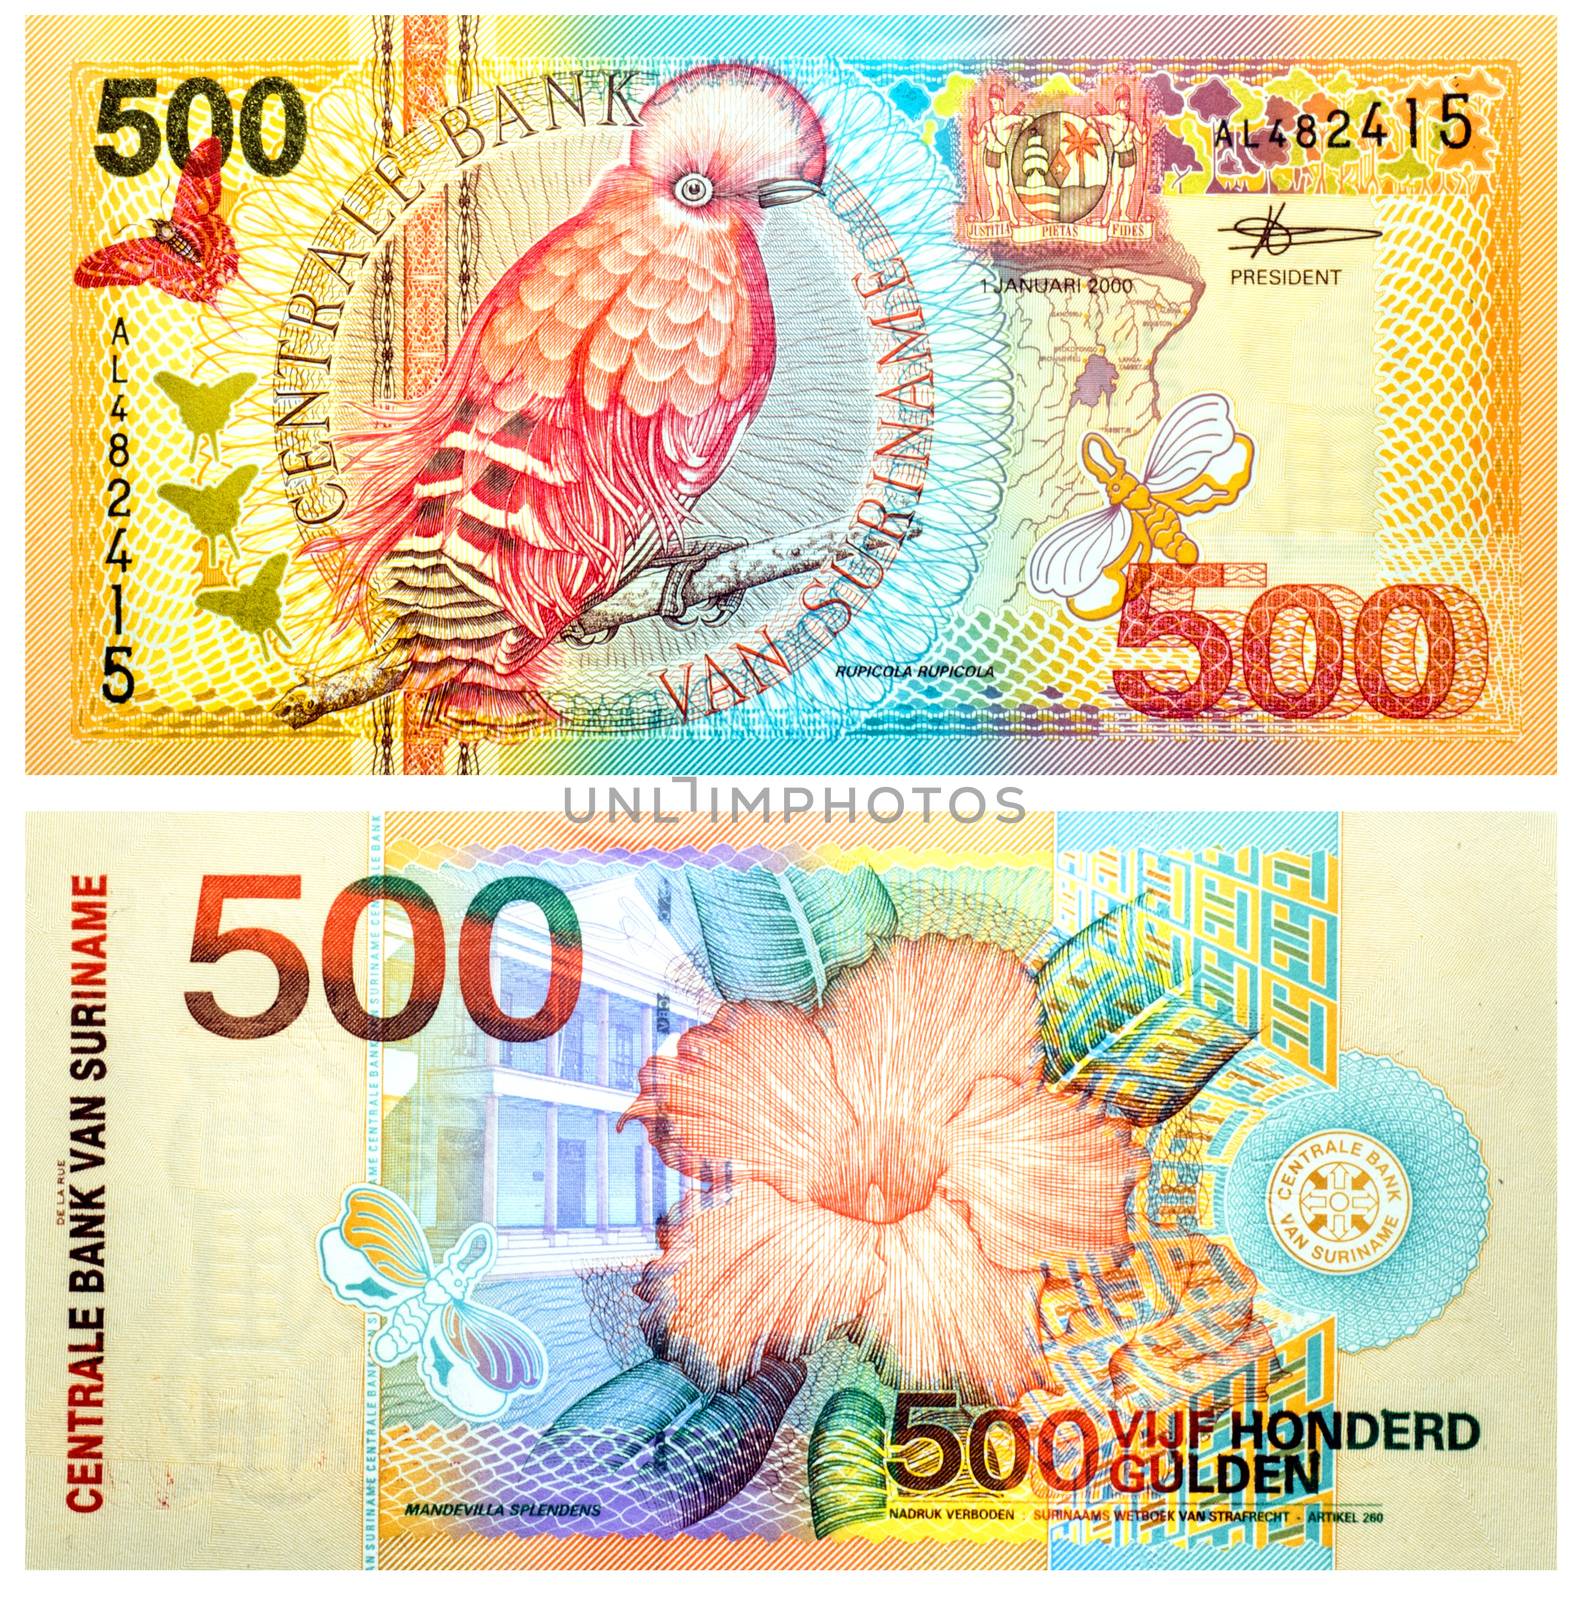 Banknote 500 Gulden Suriname front and back isolated on white emitted on 2000. 1.1.2000. Orange and green on multicolor underprint. Guianan Cock-of-the- Rock at left center, arms at upper center. Flower on back